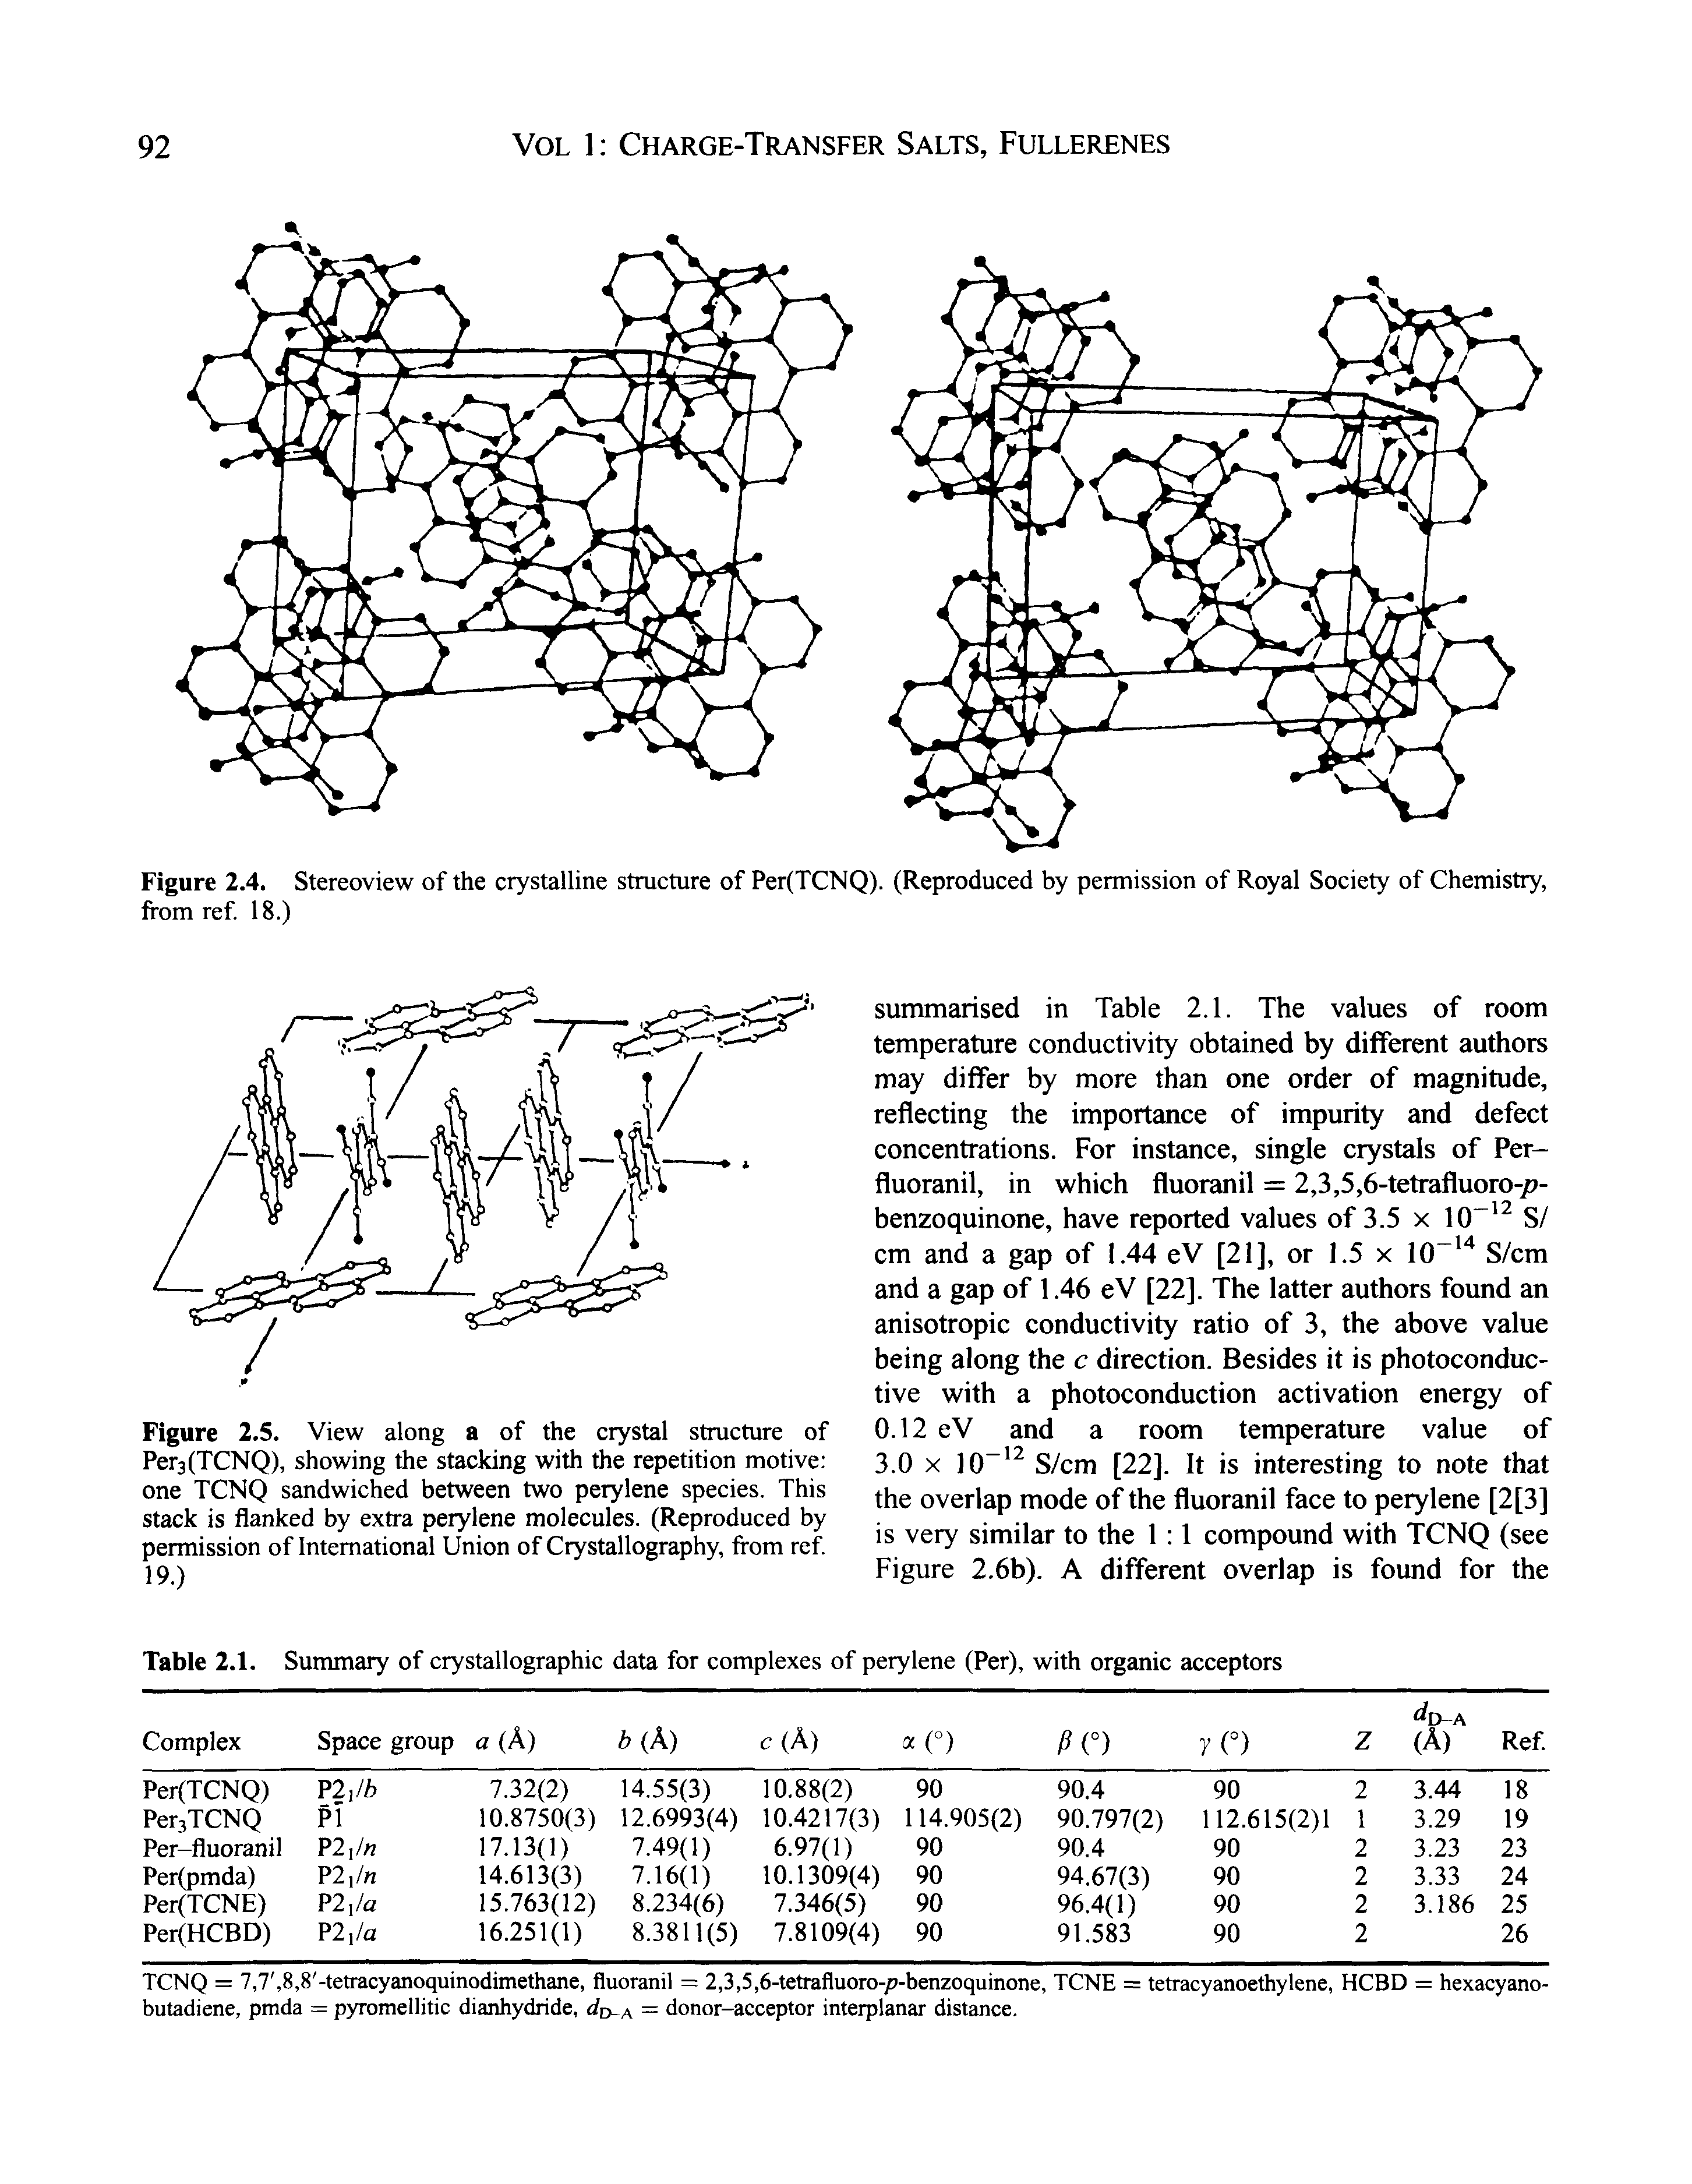 Figure 2.5. View along a of the crystal structure of Per3(TCNQ), showing the stacking with the repetition motive one TCNQ sandwiched between two perylene species. This stack is flanked by extra perylene molecules. (Reproduced by permission of International Union of Crystallography, from ref. 19.)...